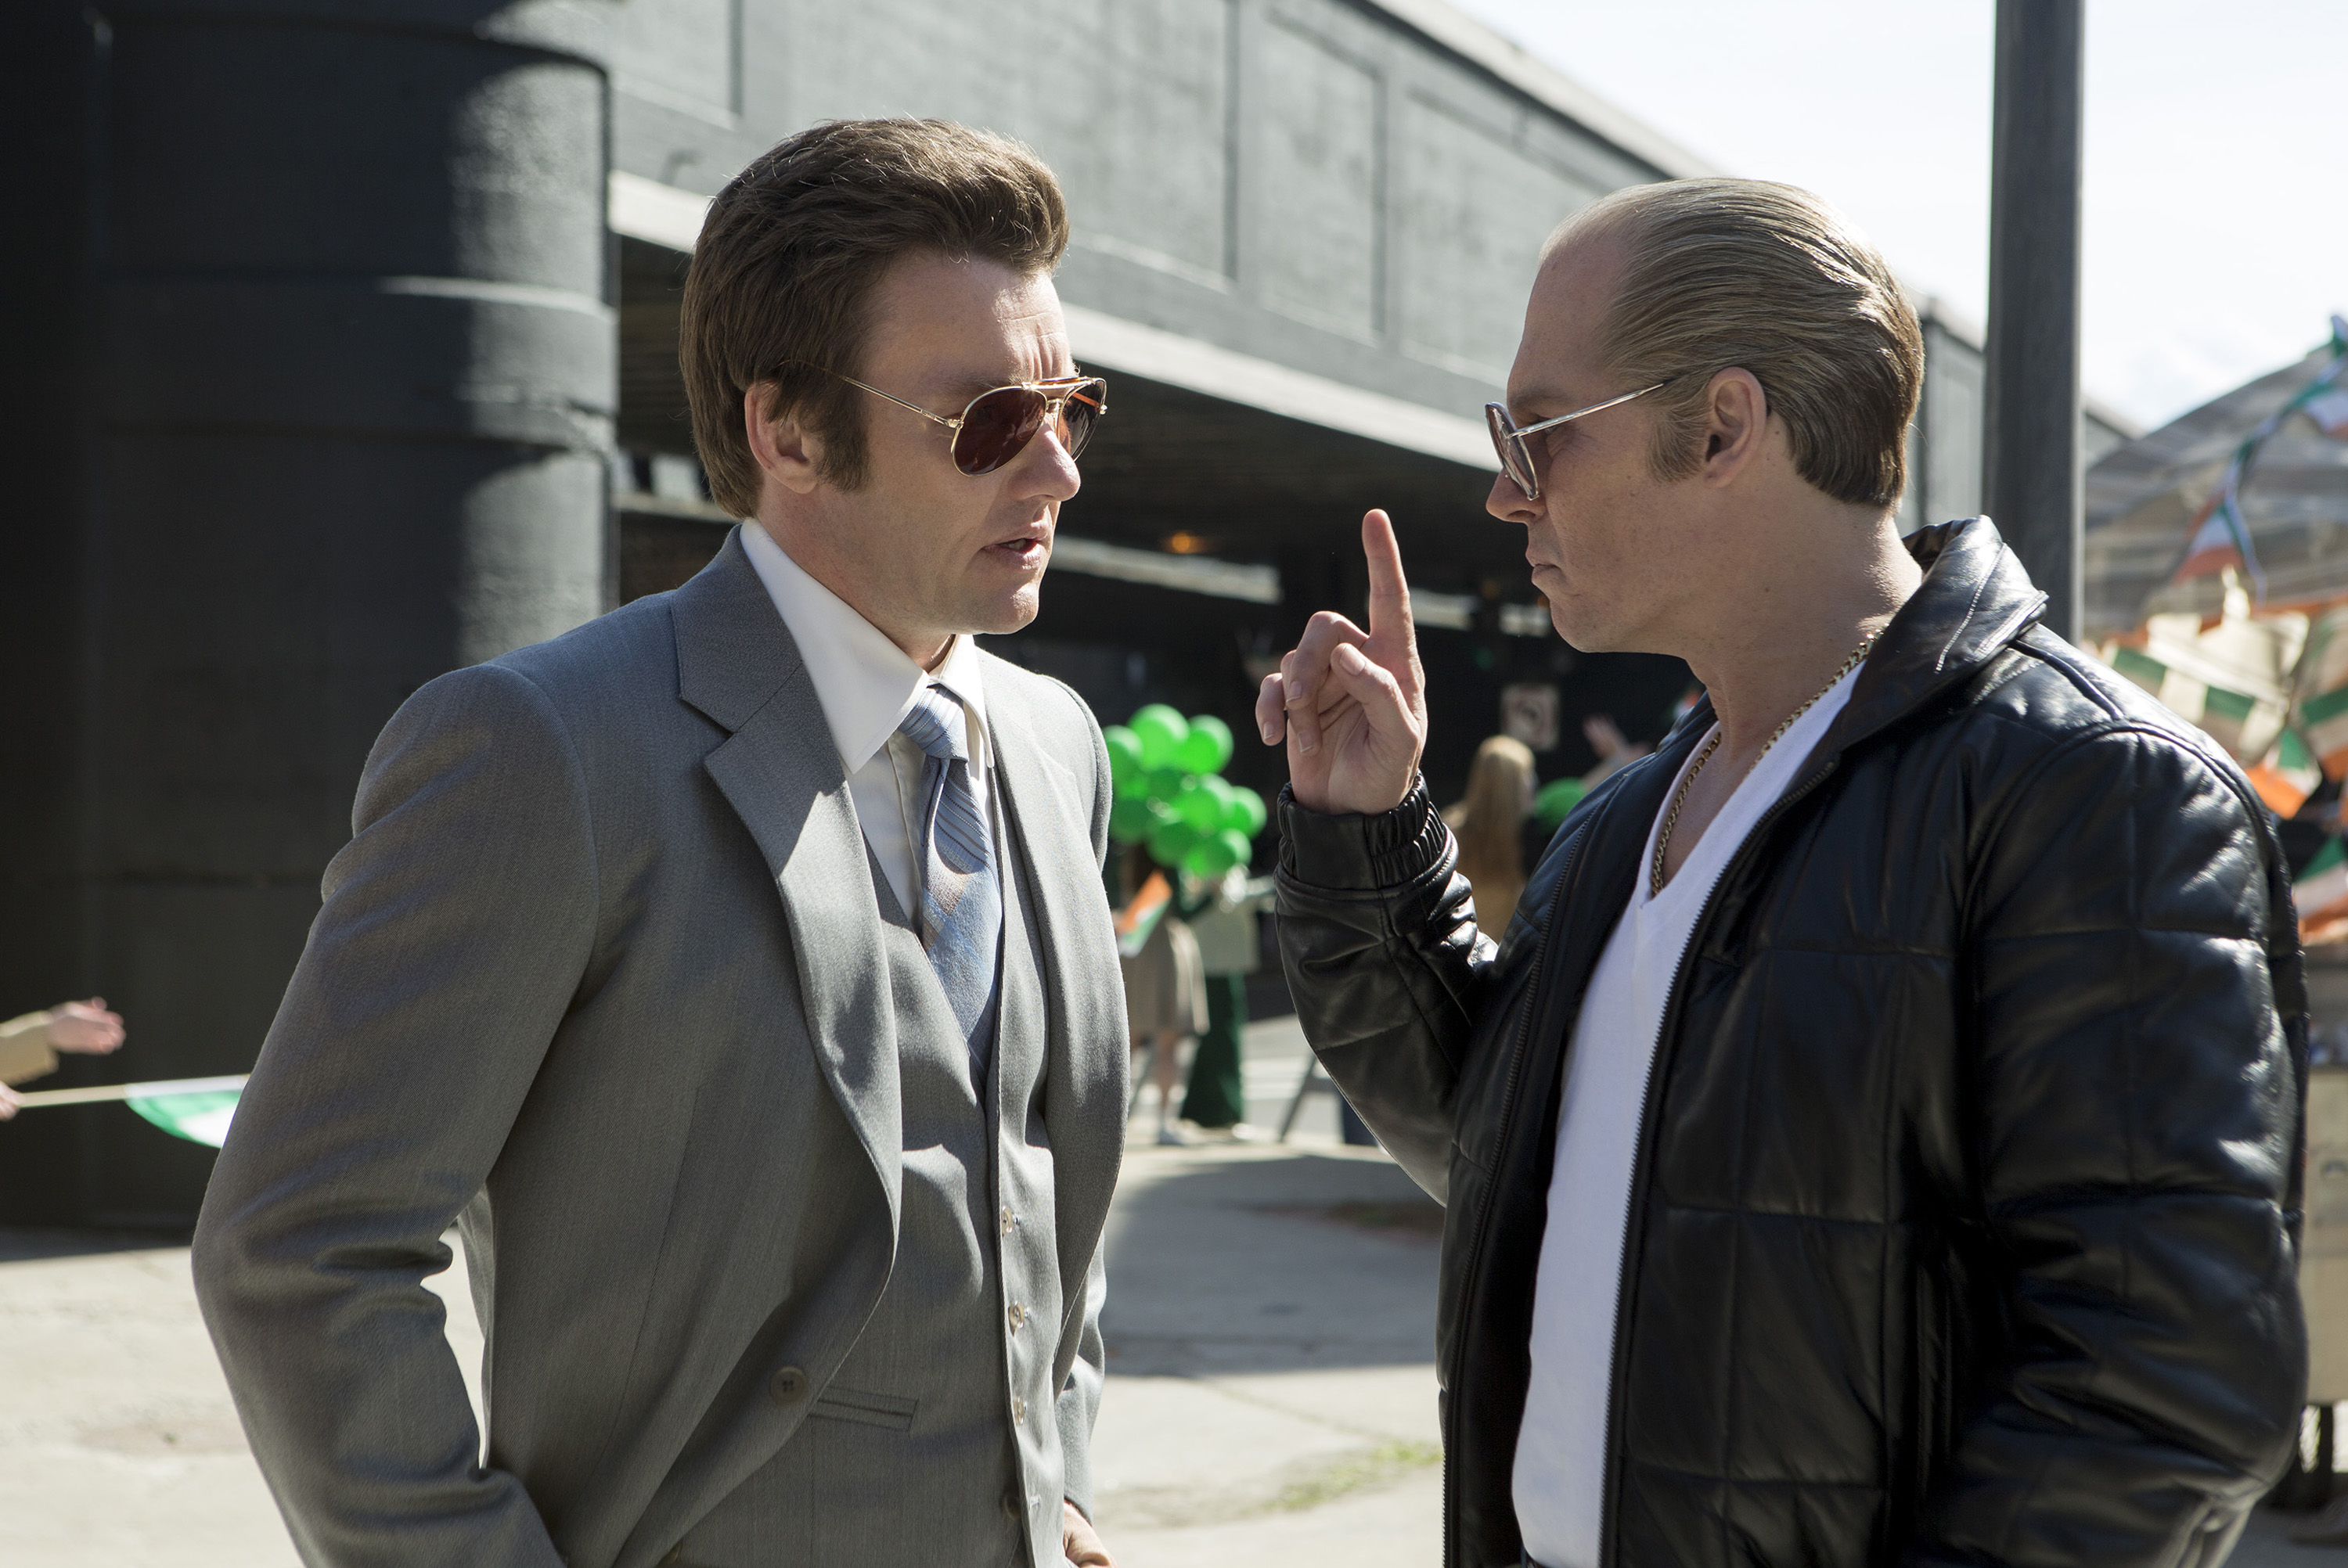 ‘Black Mass’ brings Depp’s best role in a decade as James ‘Whitey’ Bulger